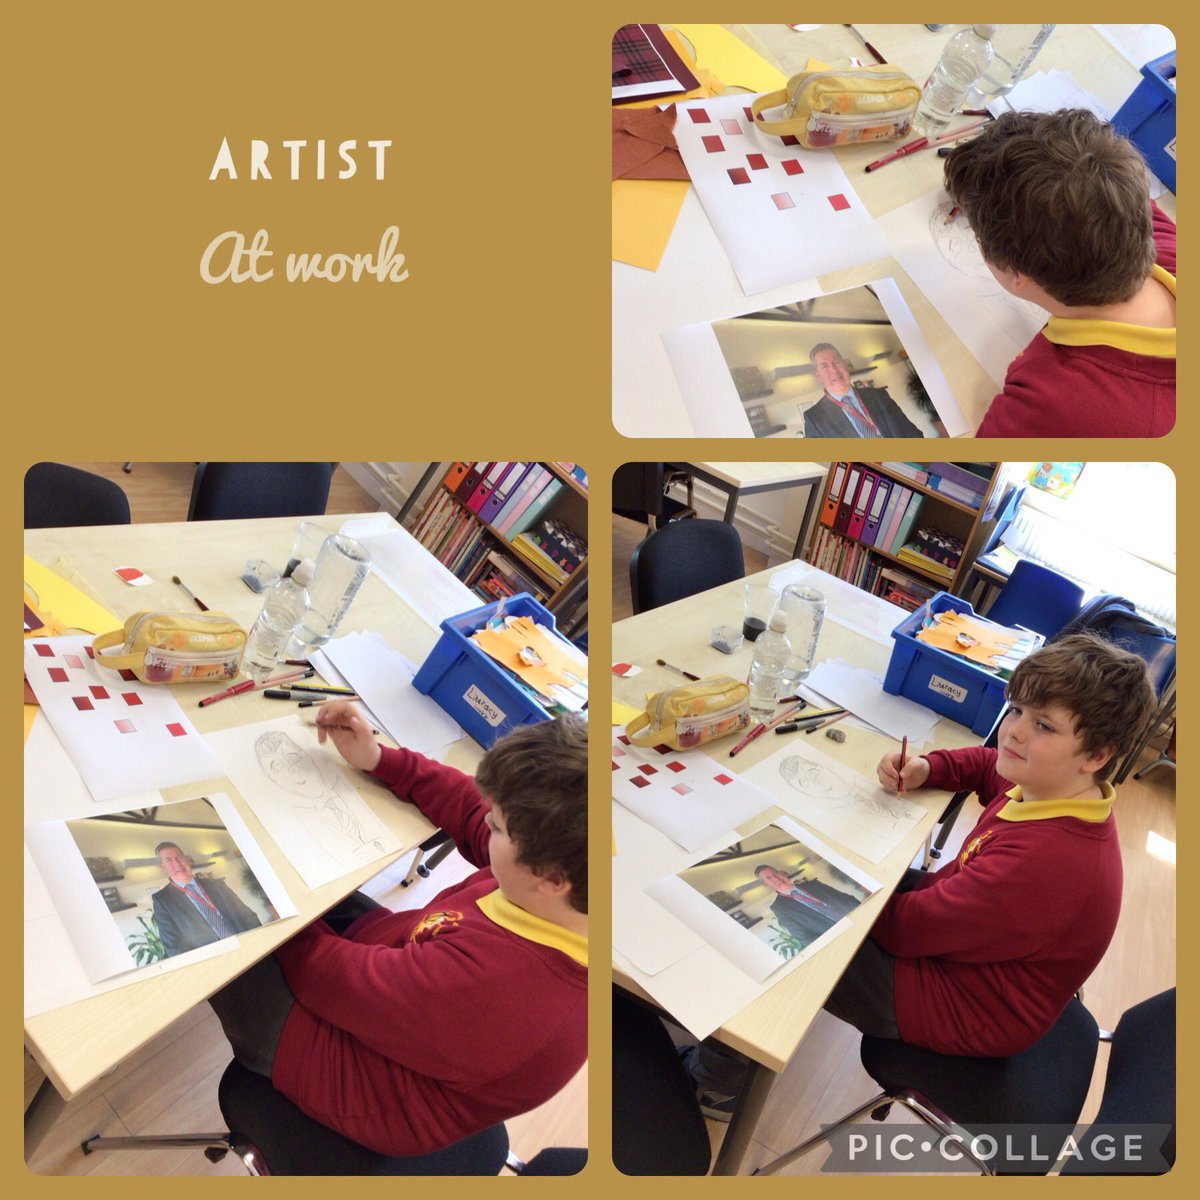 Artist at work. One of our year five pupils was chosen to recreate a layered portrait of our Headteacher